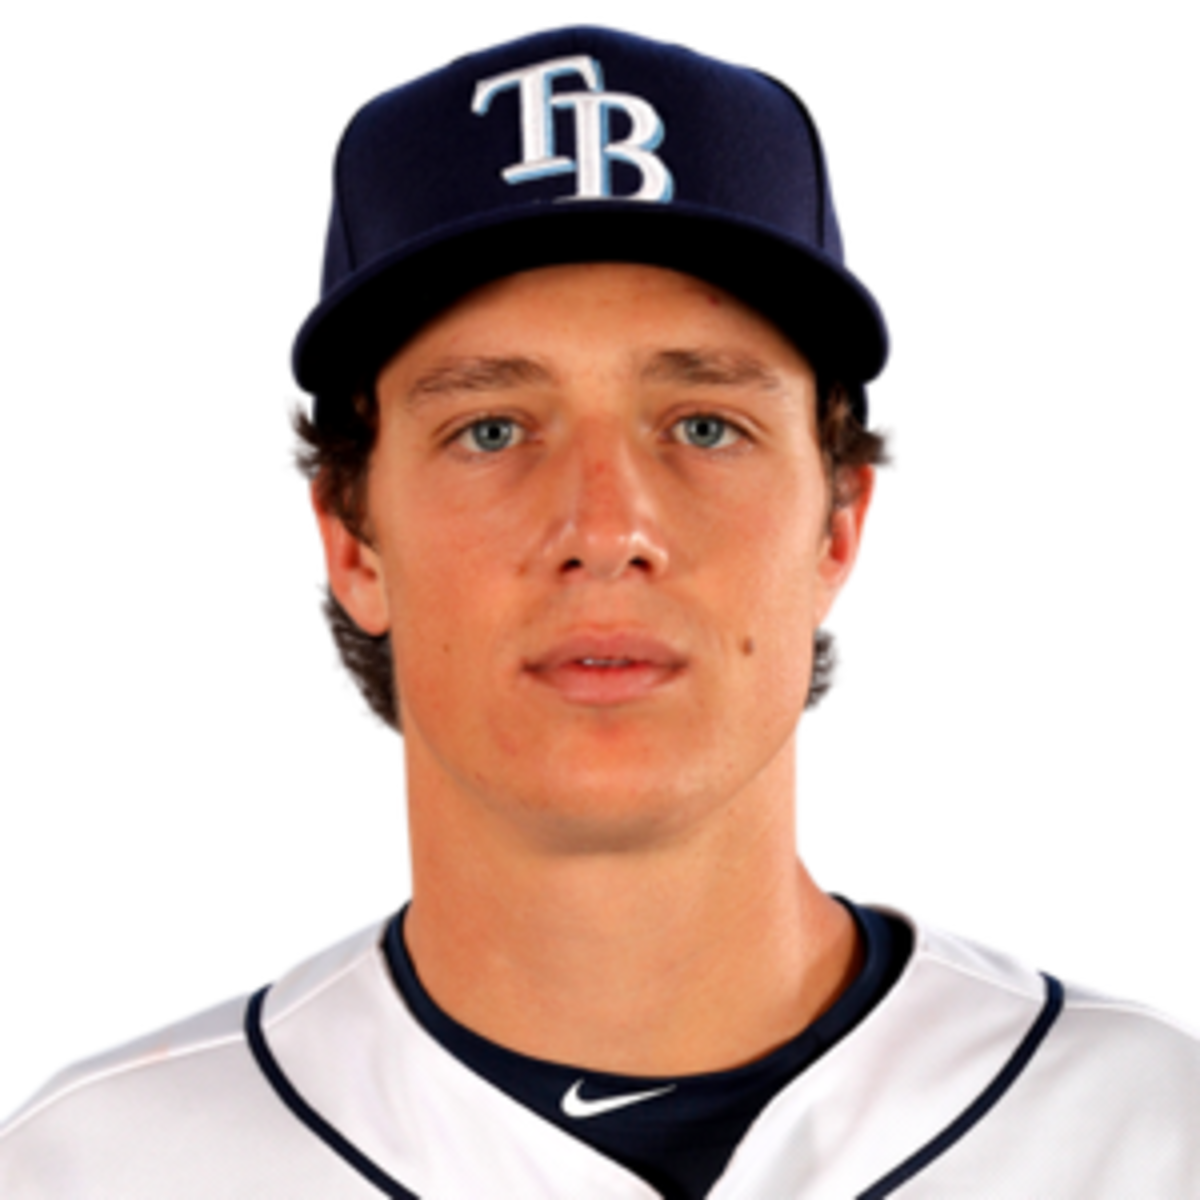 Sports Illustrated - Tampa Bay Rays pitcher Tyler Glasnow blamed